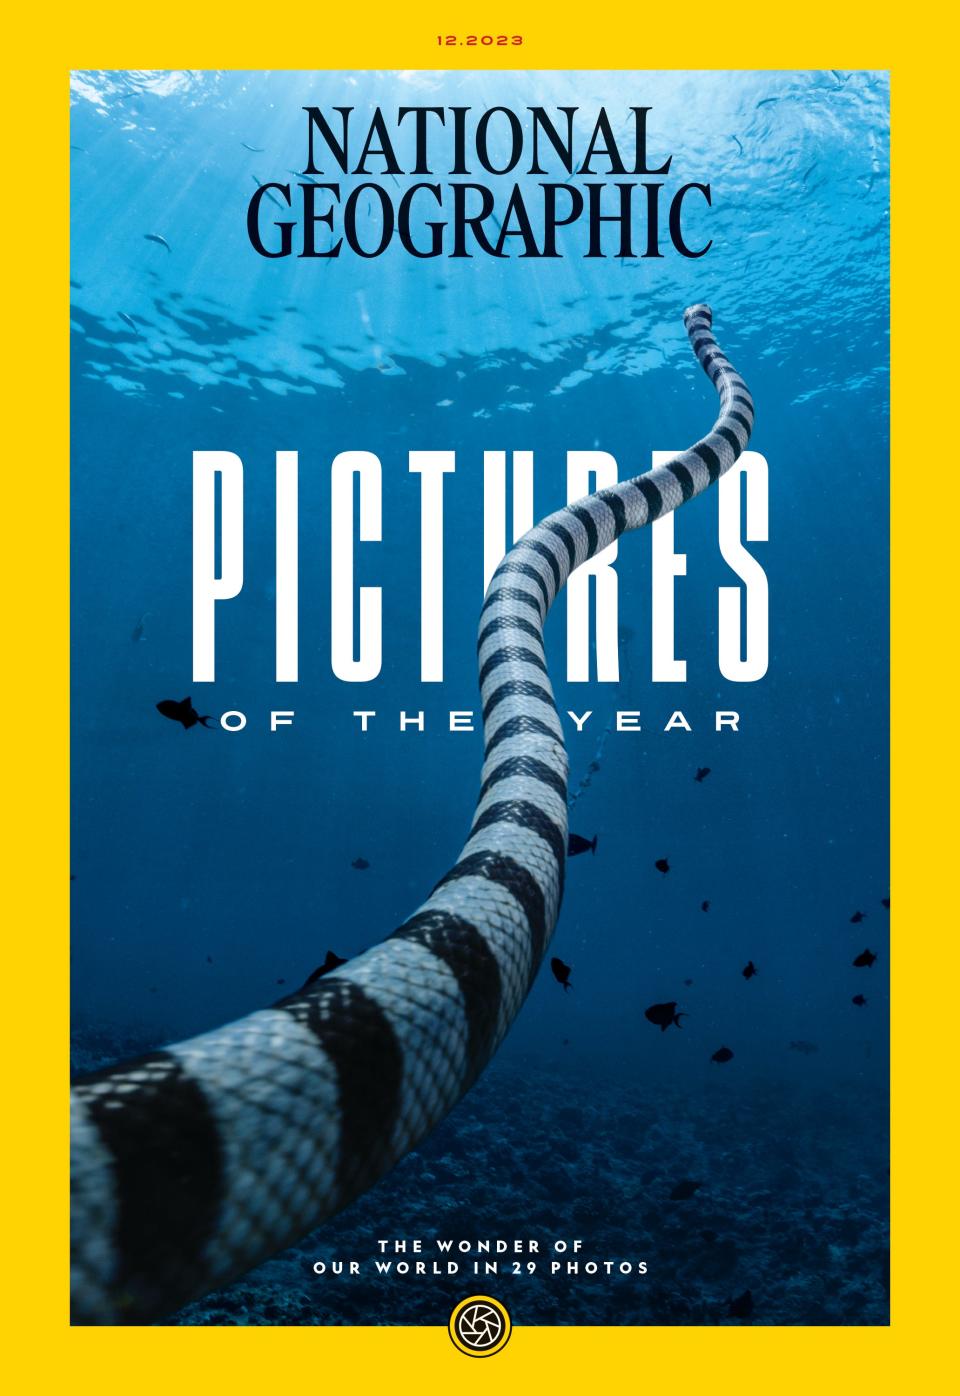 National Geographic's December 2023 cover.